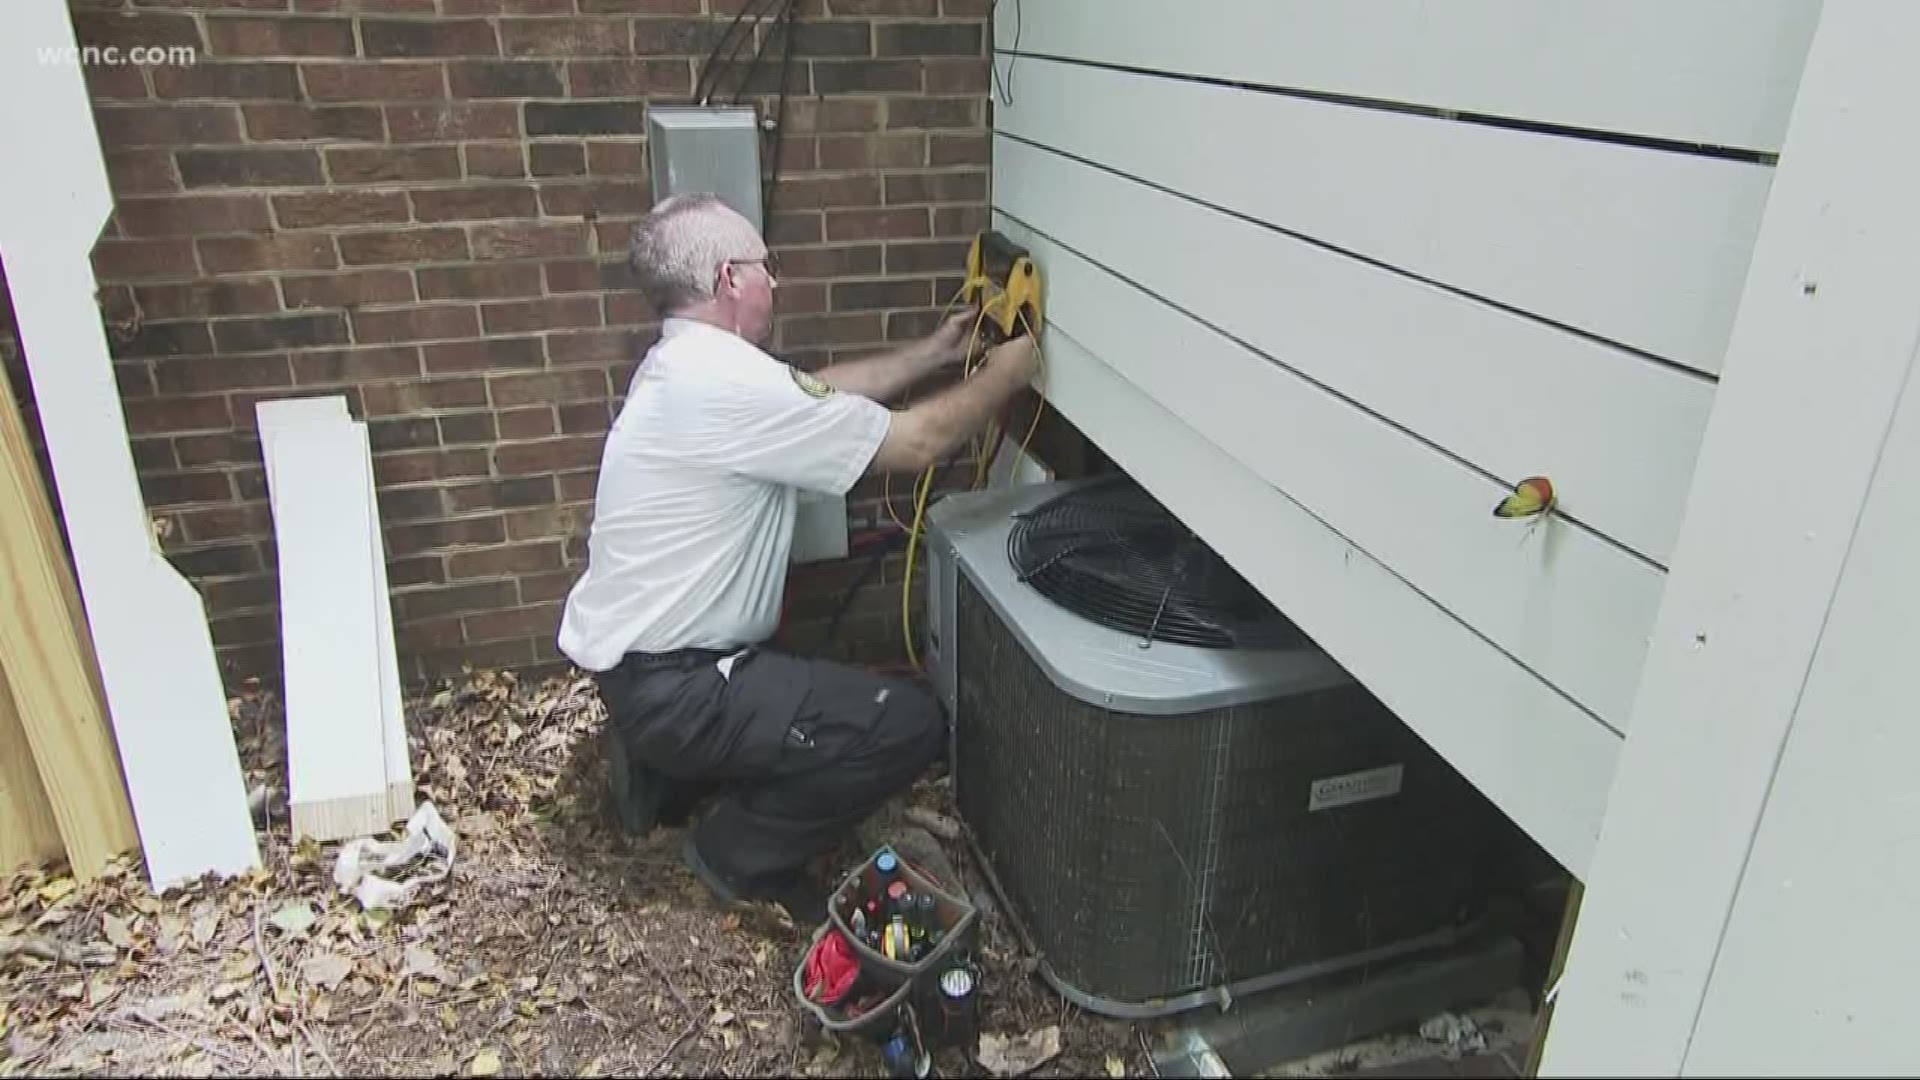 As the heat wave continues AC repair crews are entering their busiest time of the year.